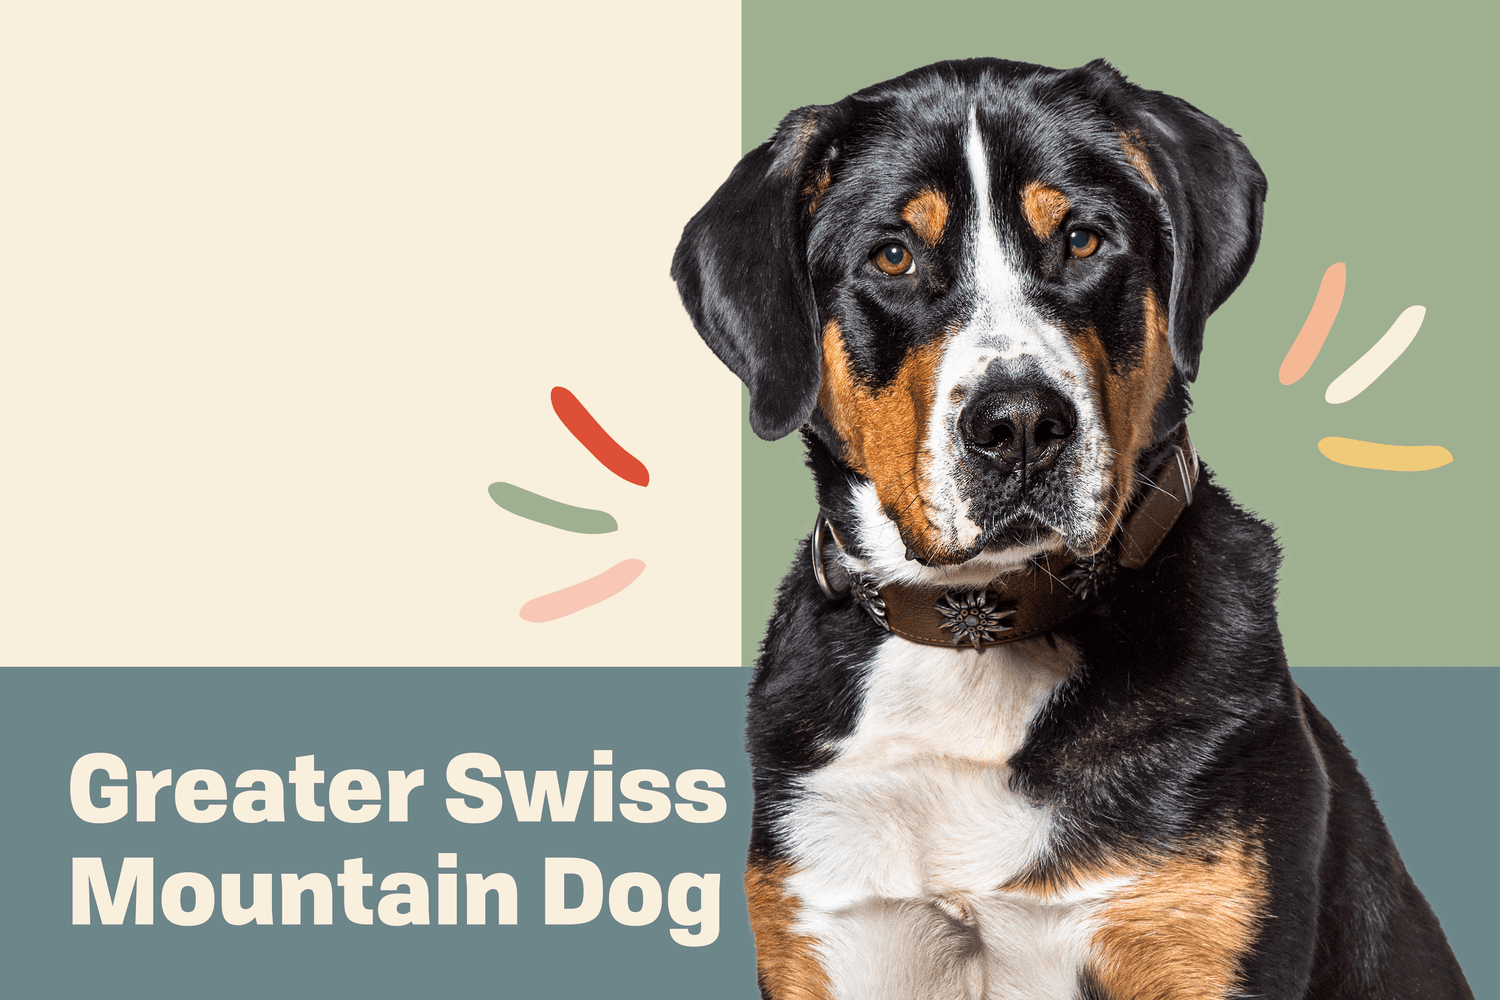 Profile treatment of Greater Swiss Mountain Dog